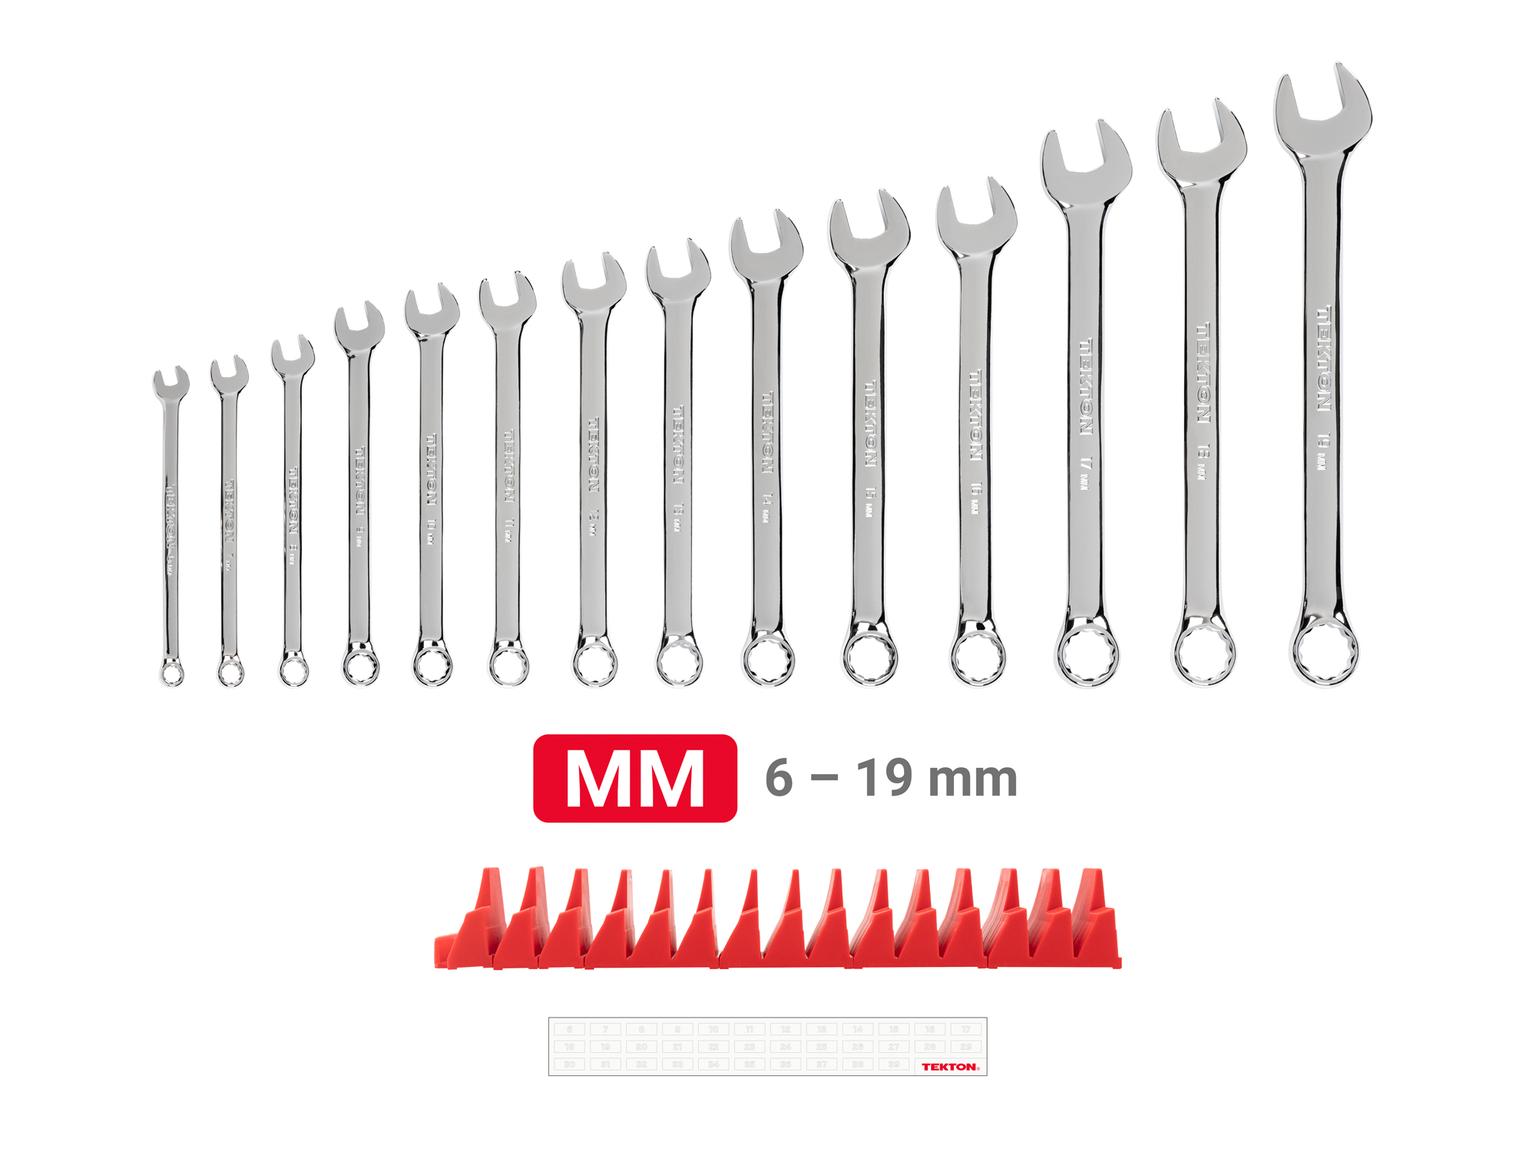 TEKTON WCB95201-T Combination Wrench Set with Modular Slotted Organizer, 14-Piece (6 - 19 mm)